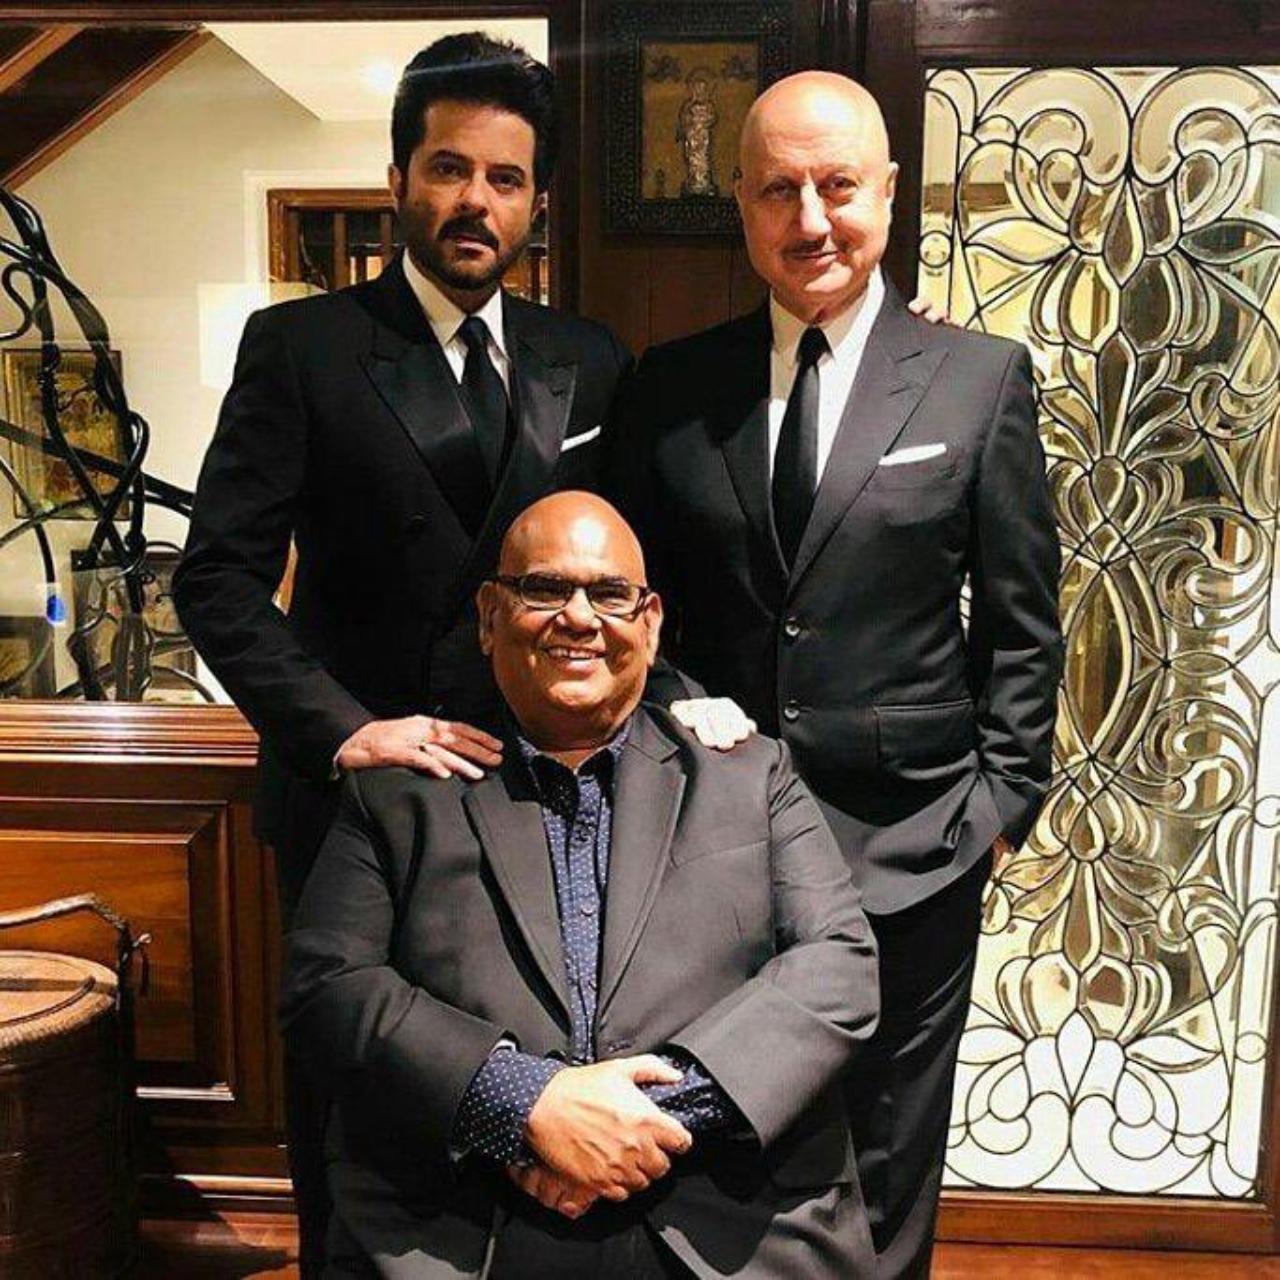 Anupam Kher was the first to break the news of the actor's demise through his social media. The actor later revealed that he got a call at 2 am informing about the demise of his dear friend